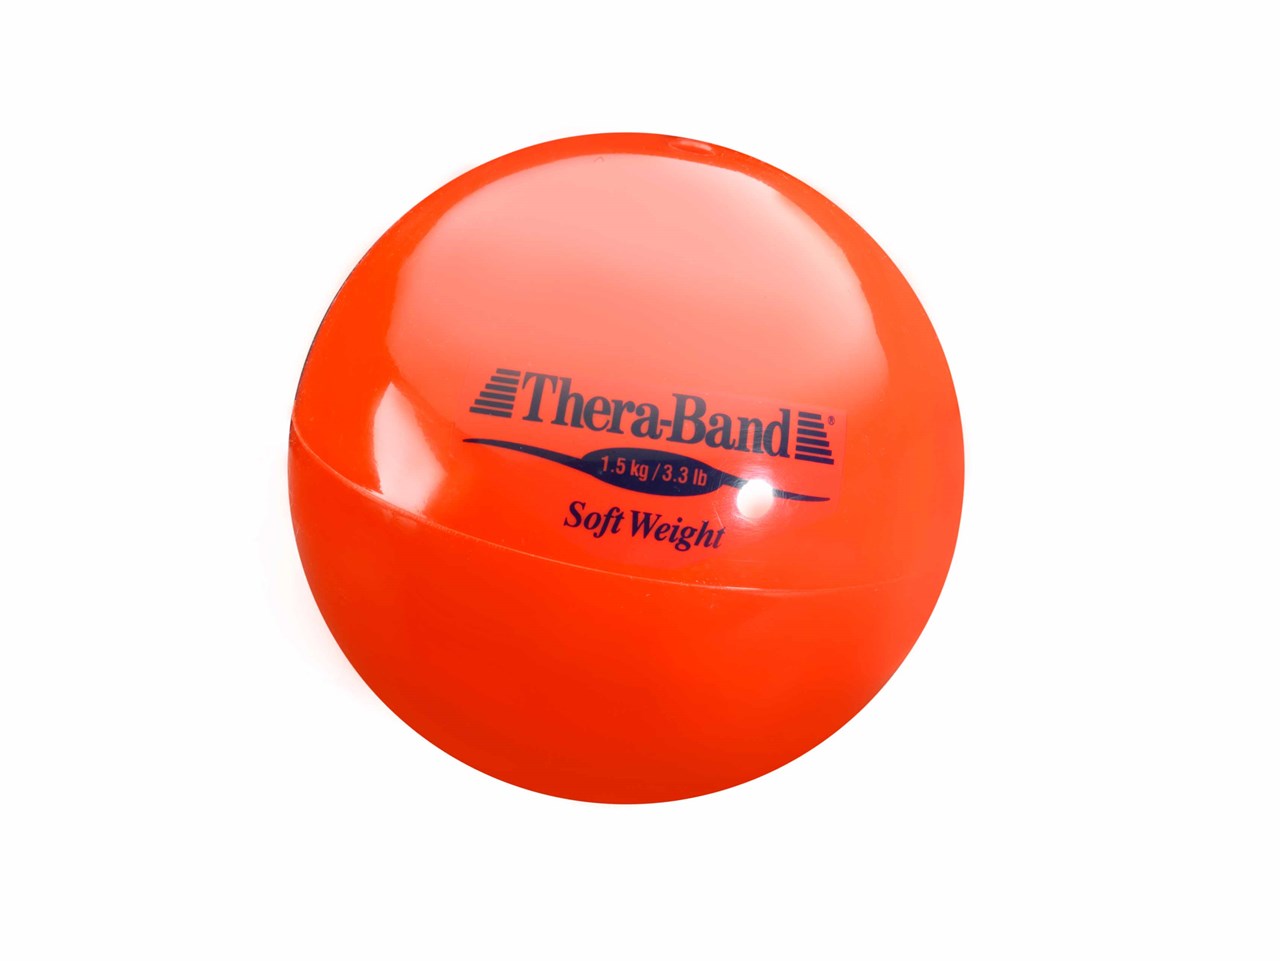 Picture of Thera-Band® Gewichtsball, Farbe: Rot, Gewicht: 1,5 kg